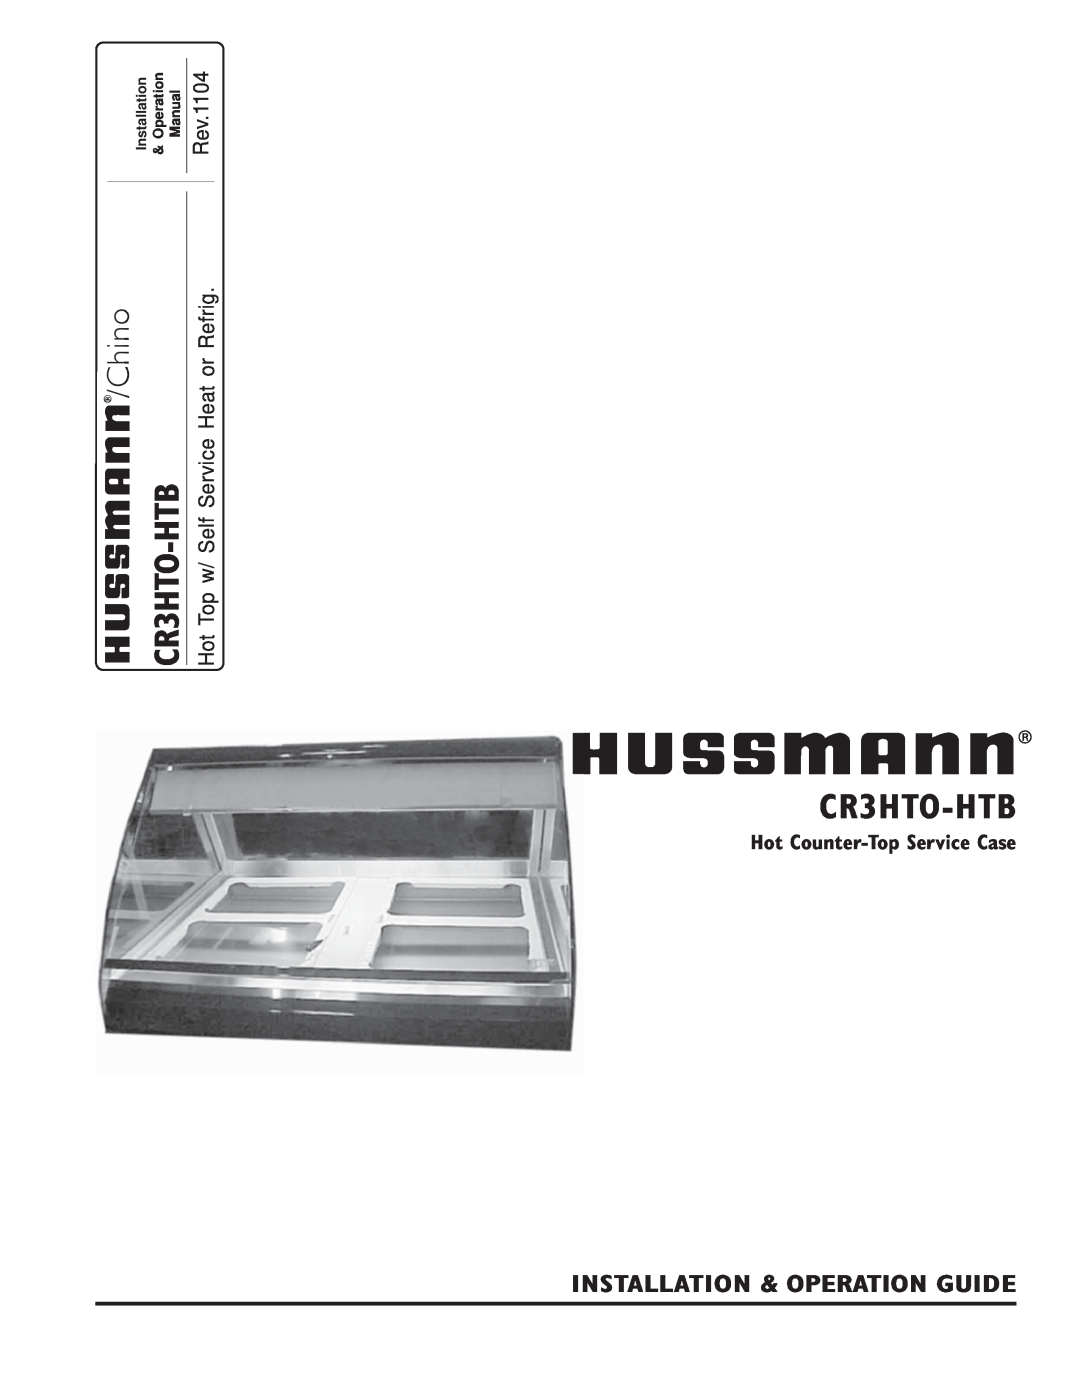 hussman CR3HTO-HTB operation manual Chino, Hot Counter-Top Service Case, Installation & Operation Guide, Manual 